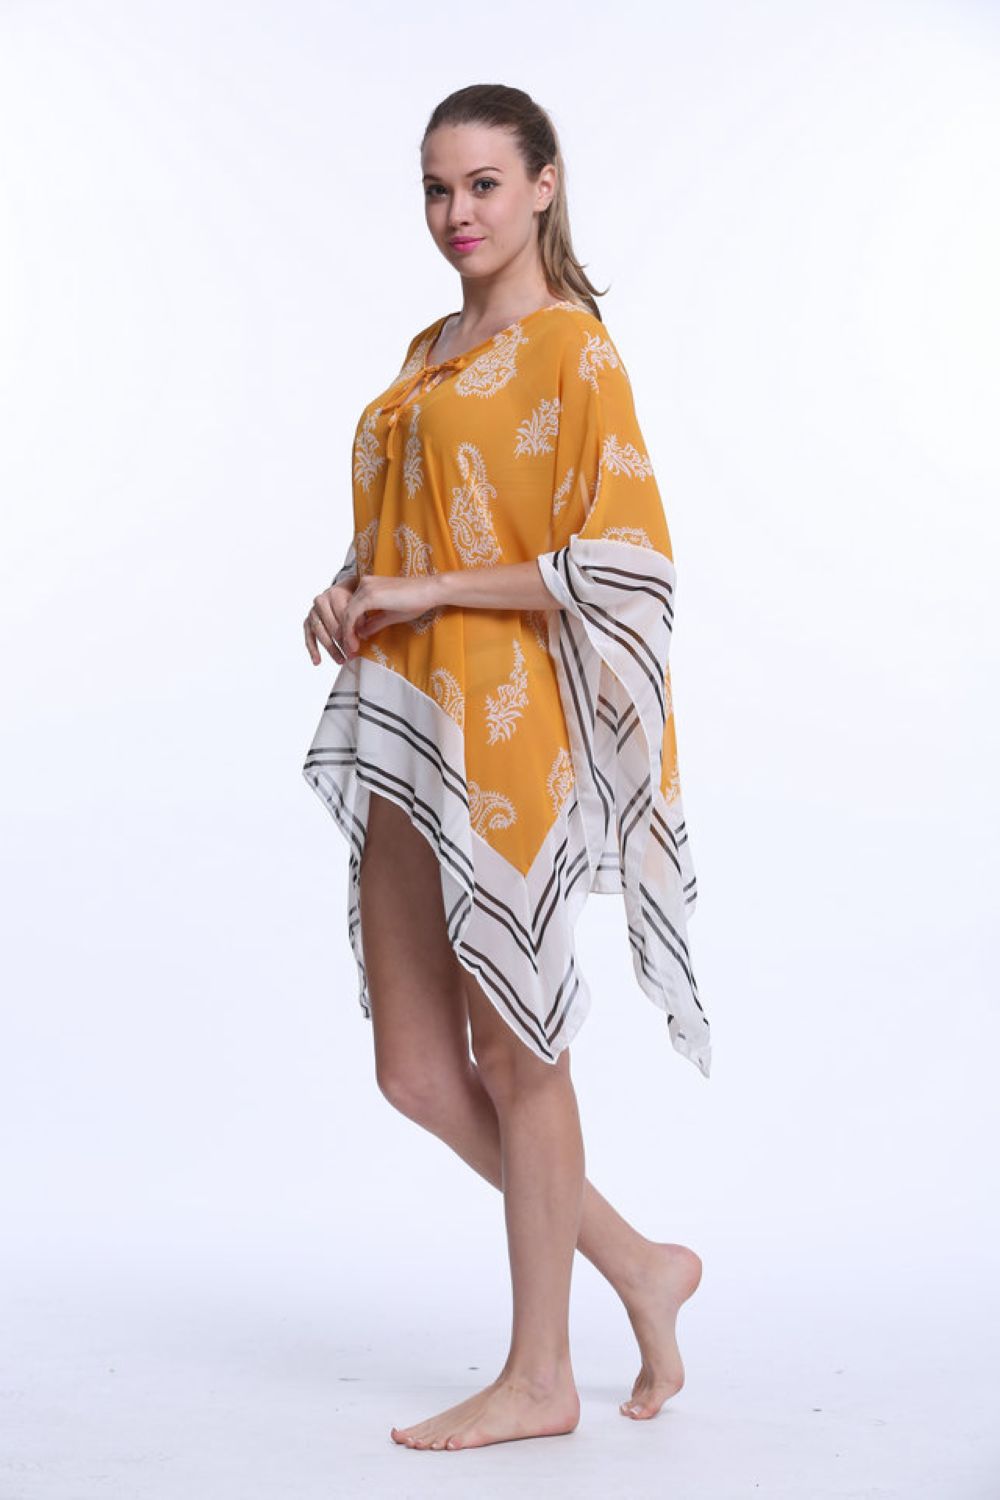 F4529swimsuit cover ups high quality transparent cover beach dress